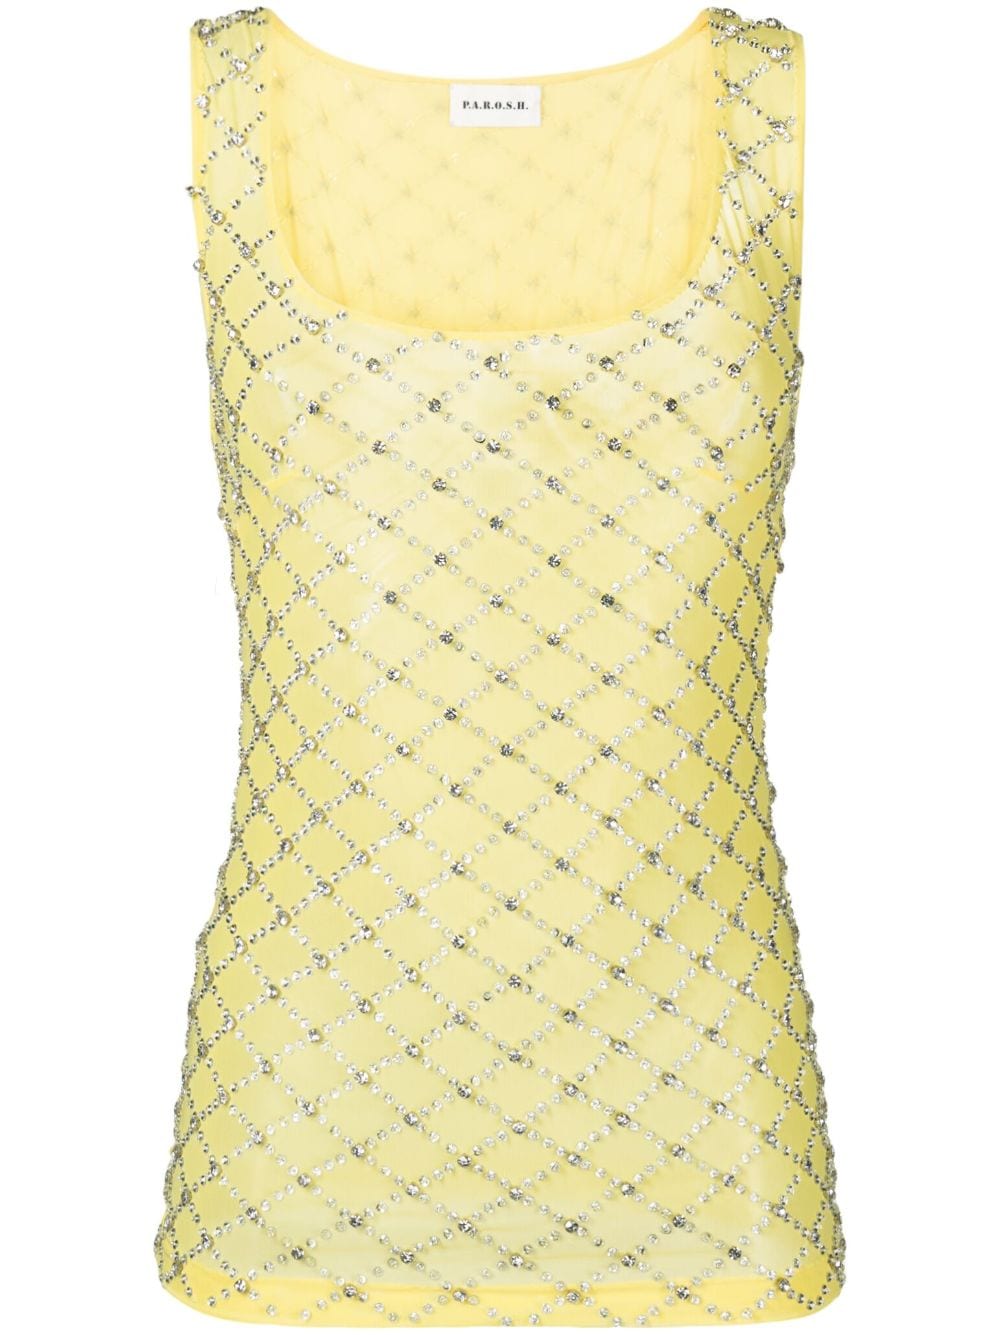 P.A.R.O.S.H. crystal-embellished top - Yellow von P.A.R.O.S.H.